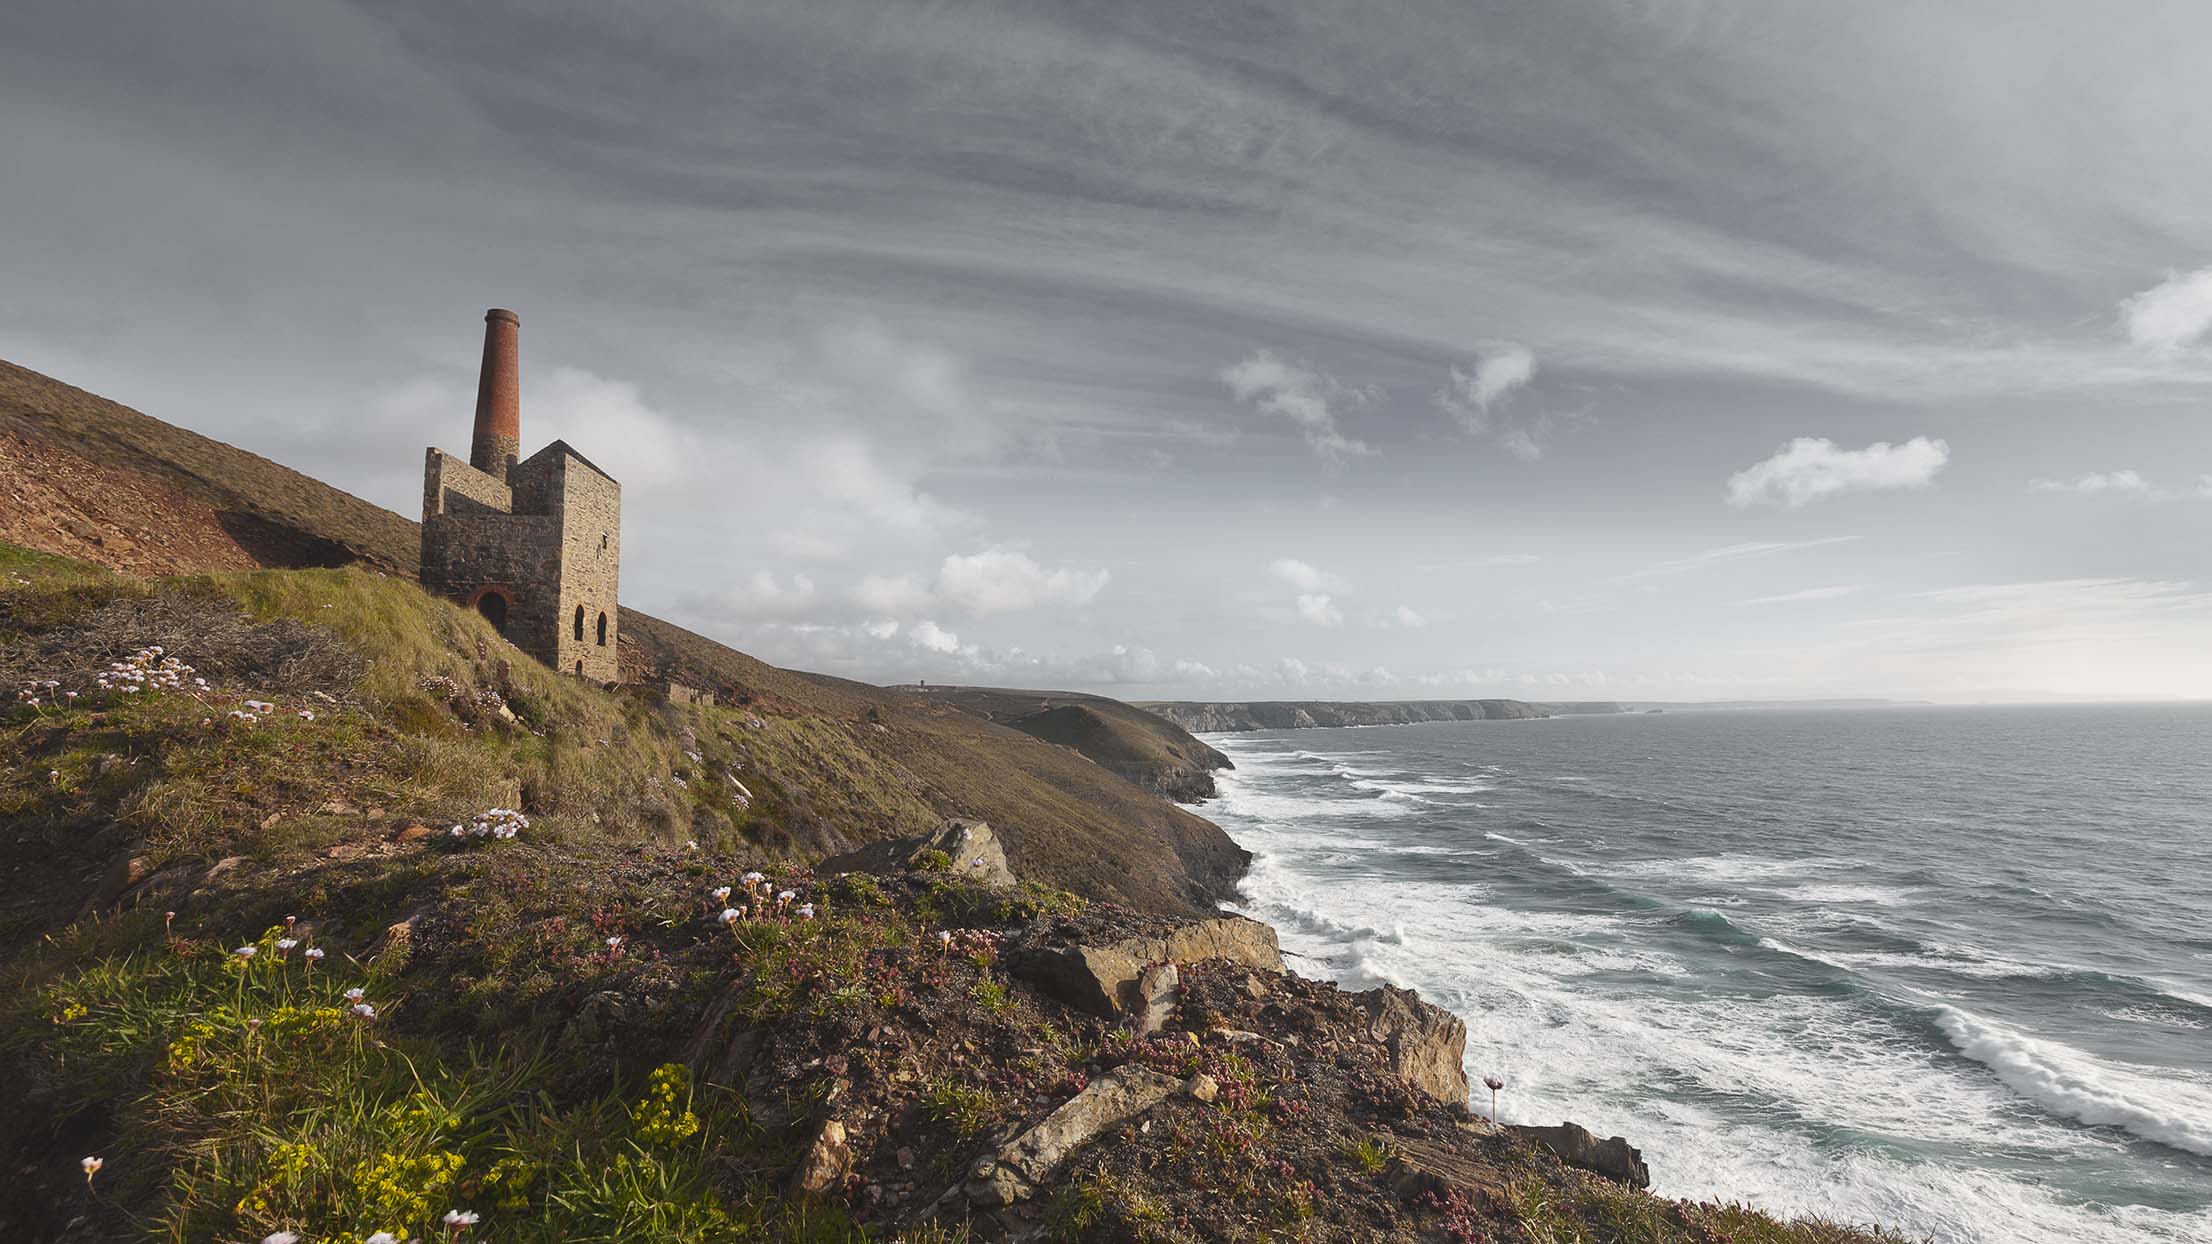 The filming locations of Poldark